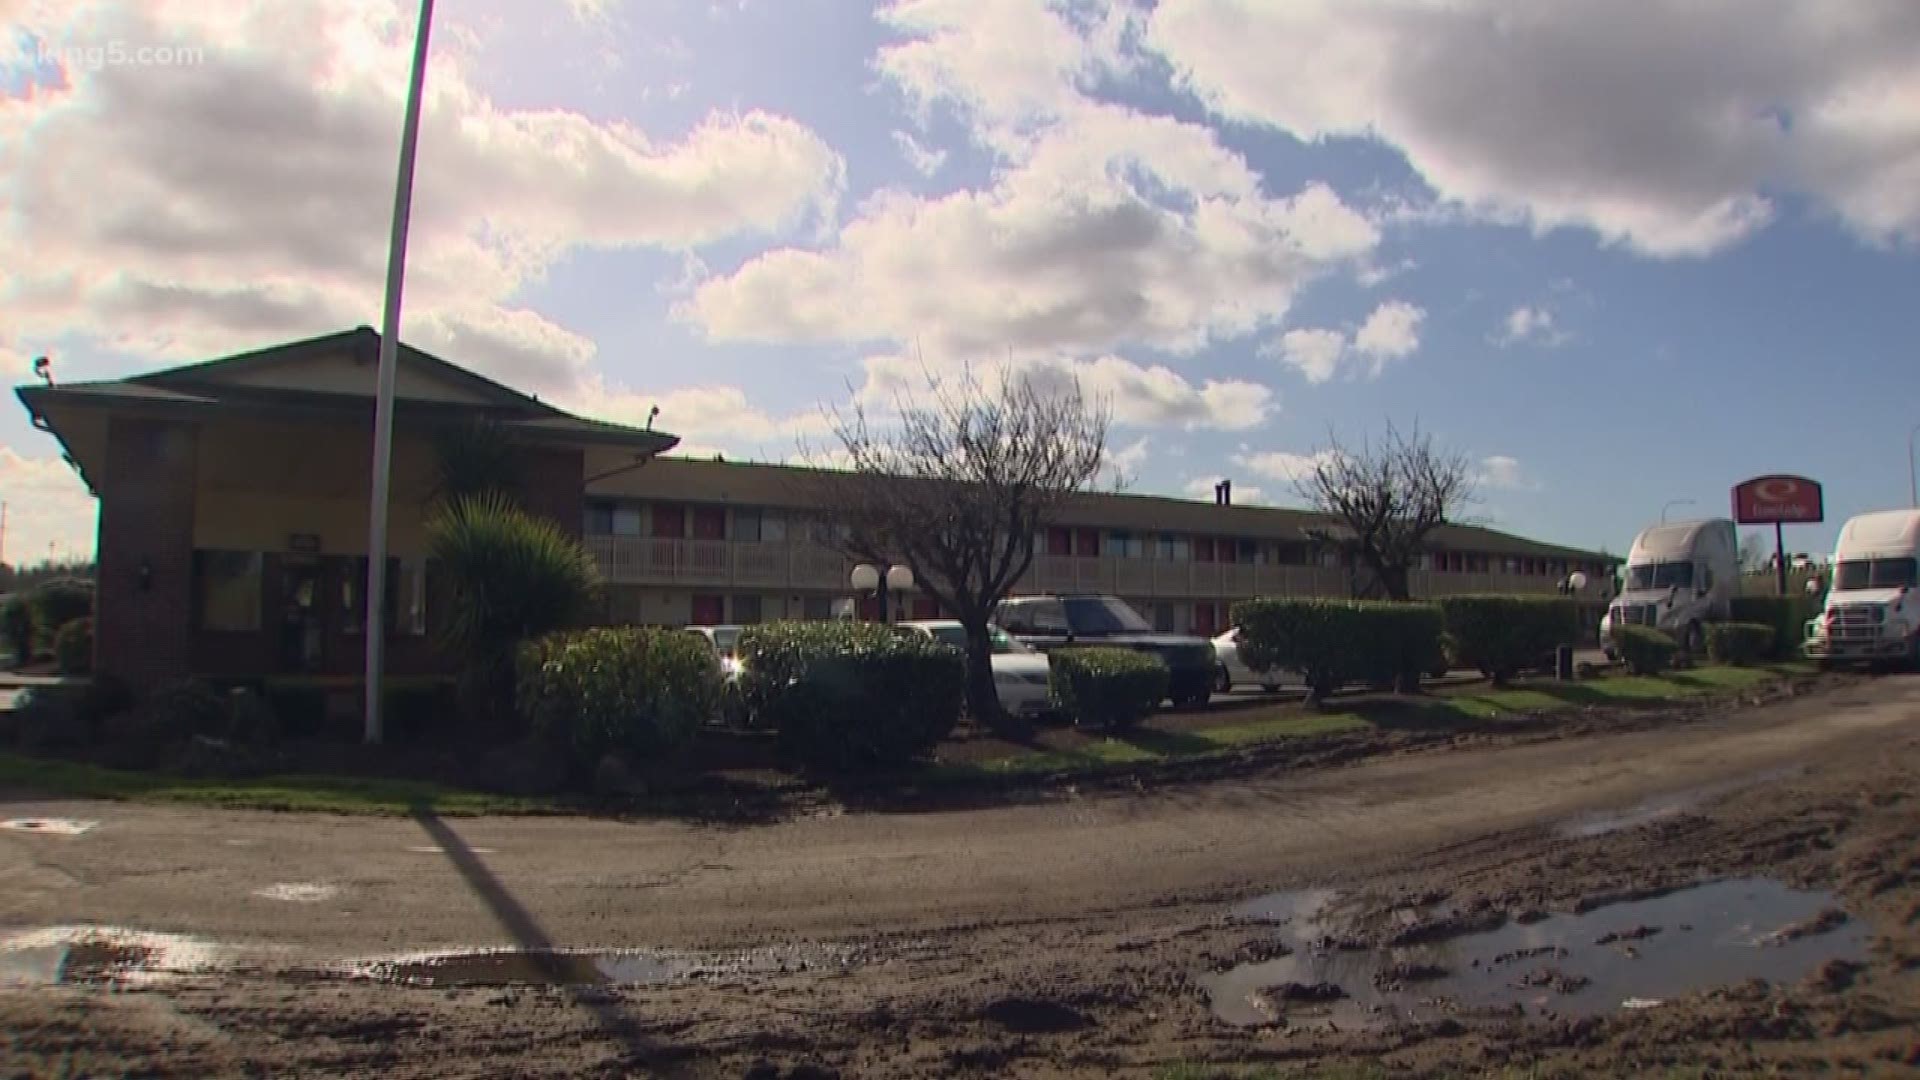 A judge has denied a request by the city of Kent to block King County from using a motel within city limits as a coronavirus quarantine site.